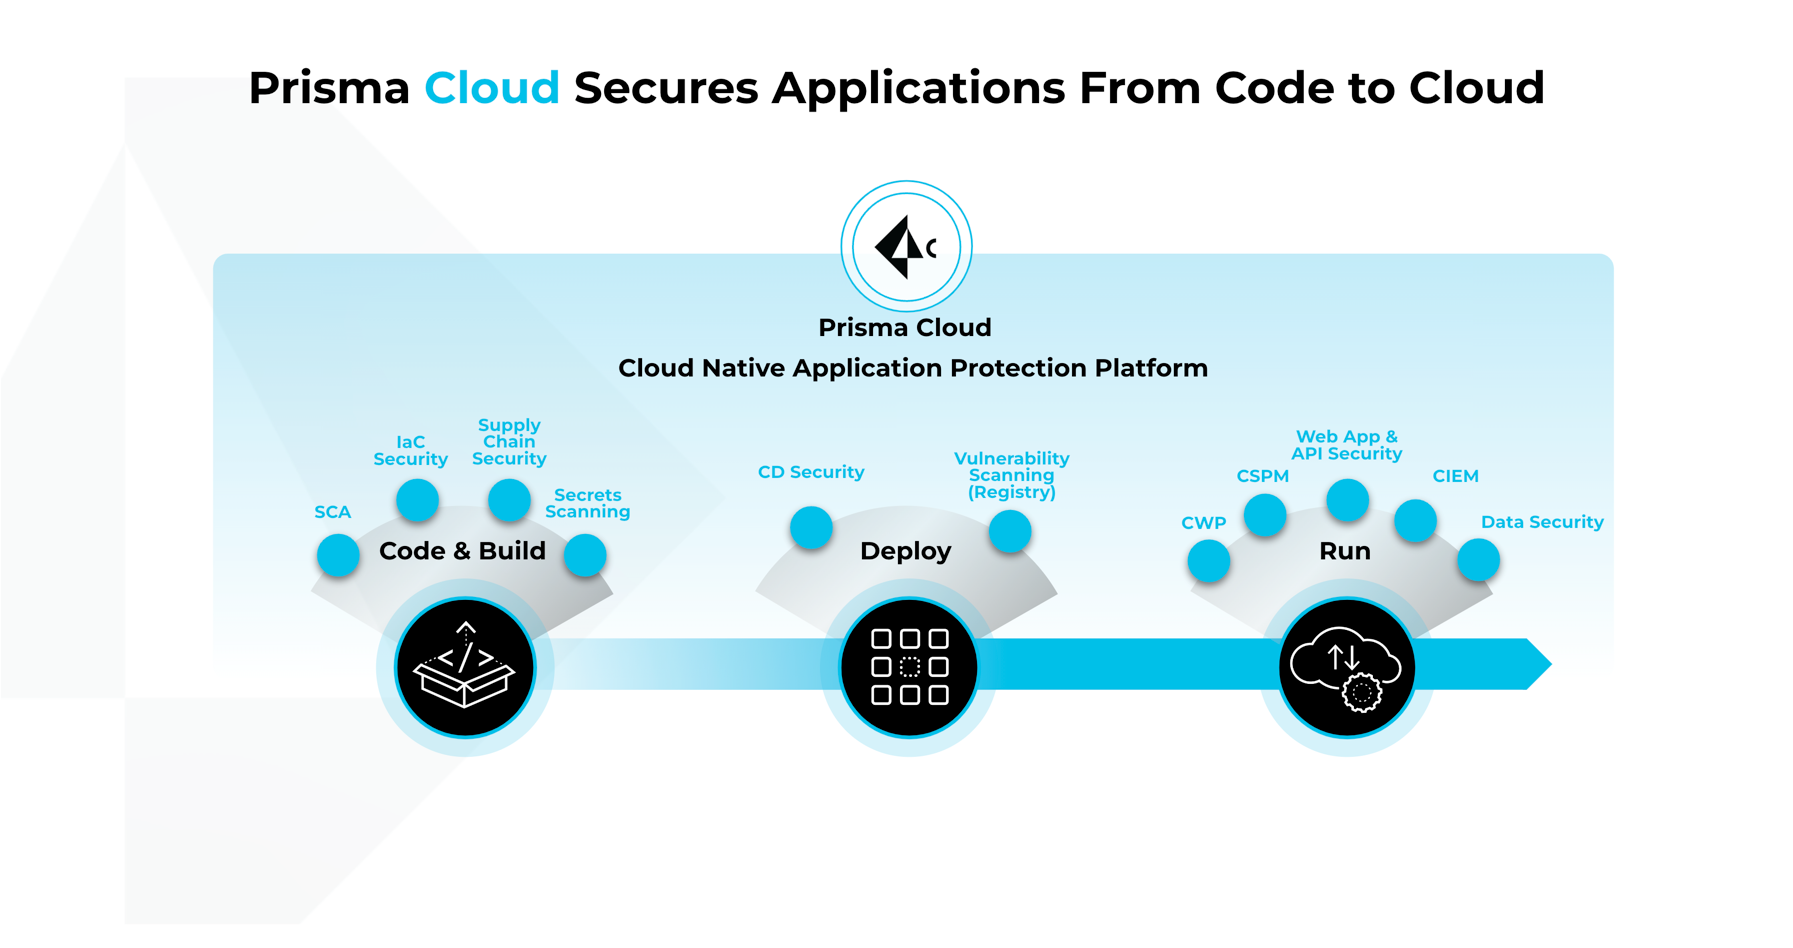 Prisma Cloud secures applications from code to cloud